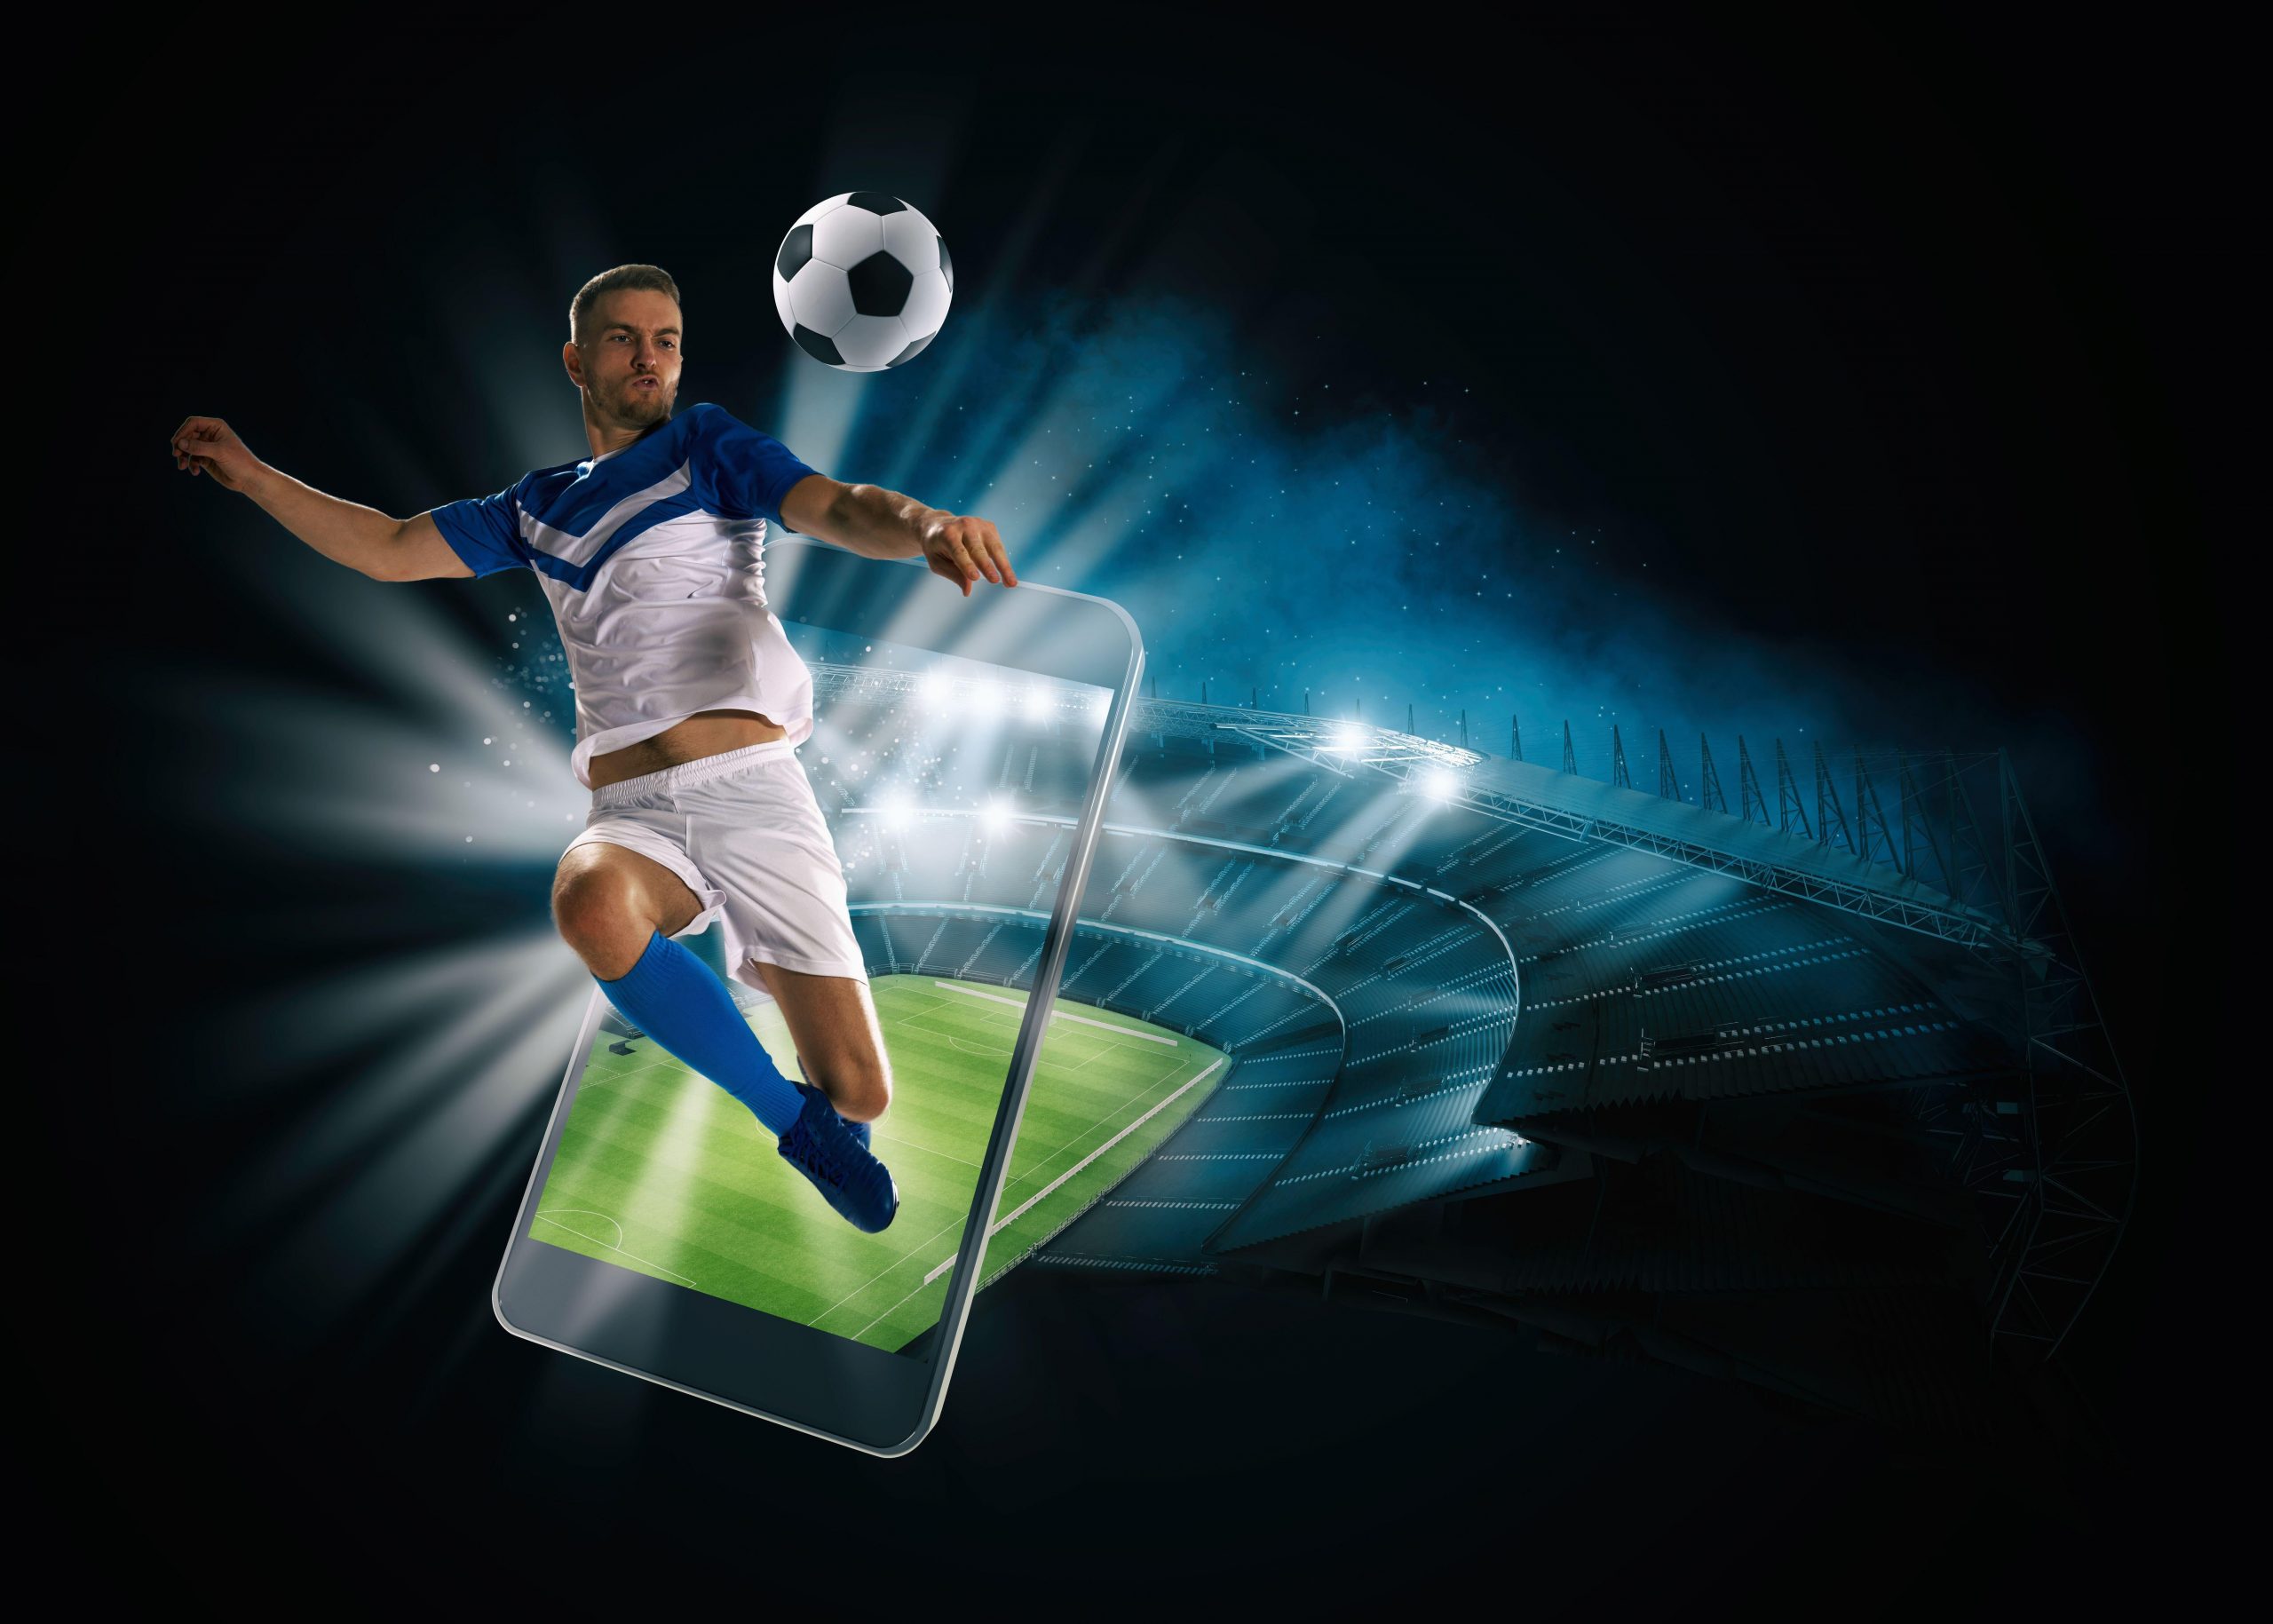 Mobile football betting options with casin.com